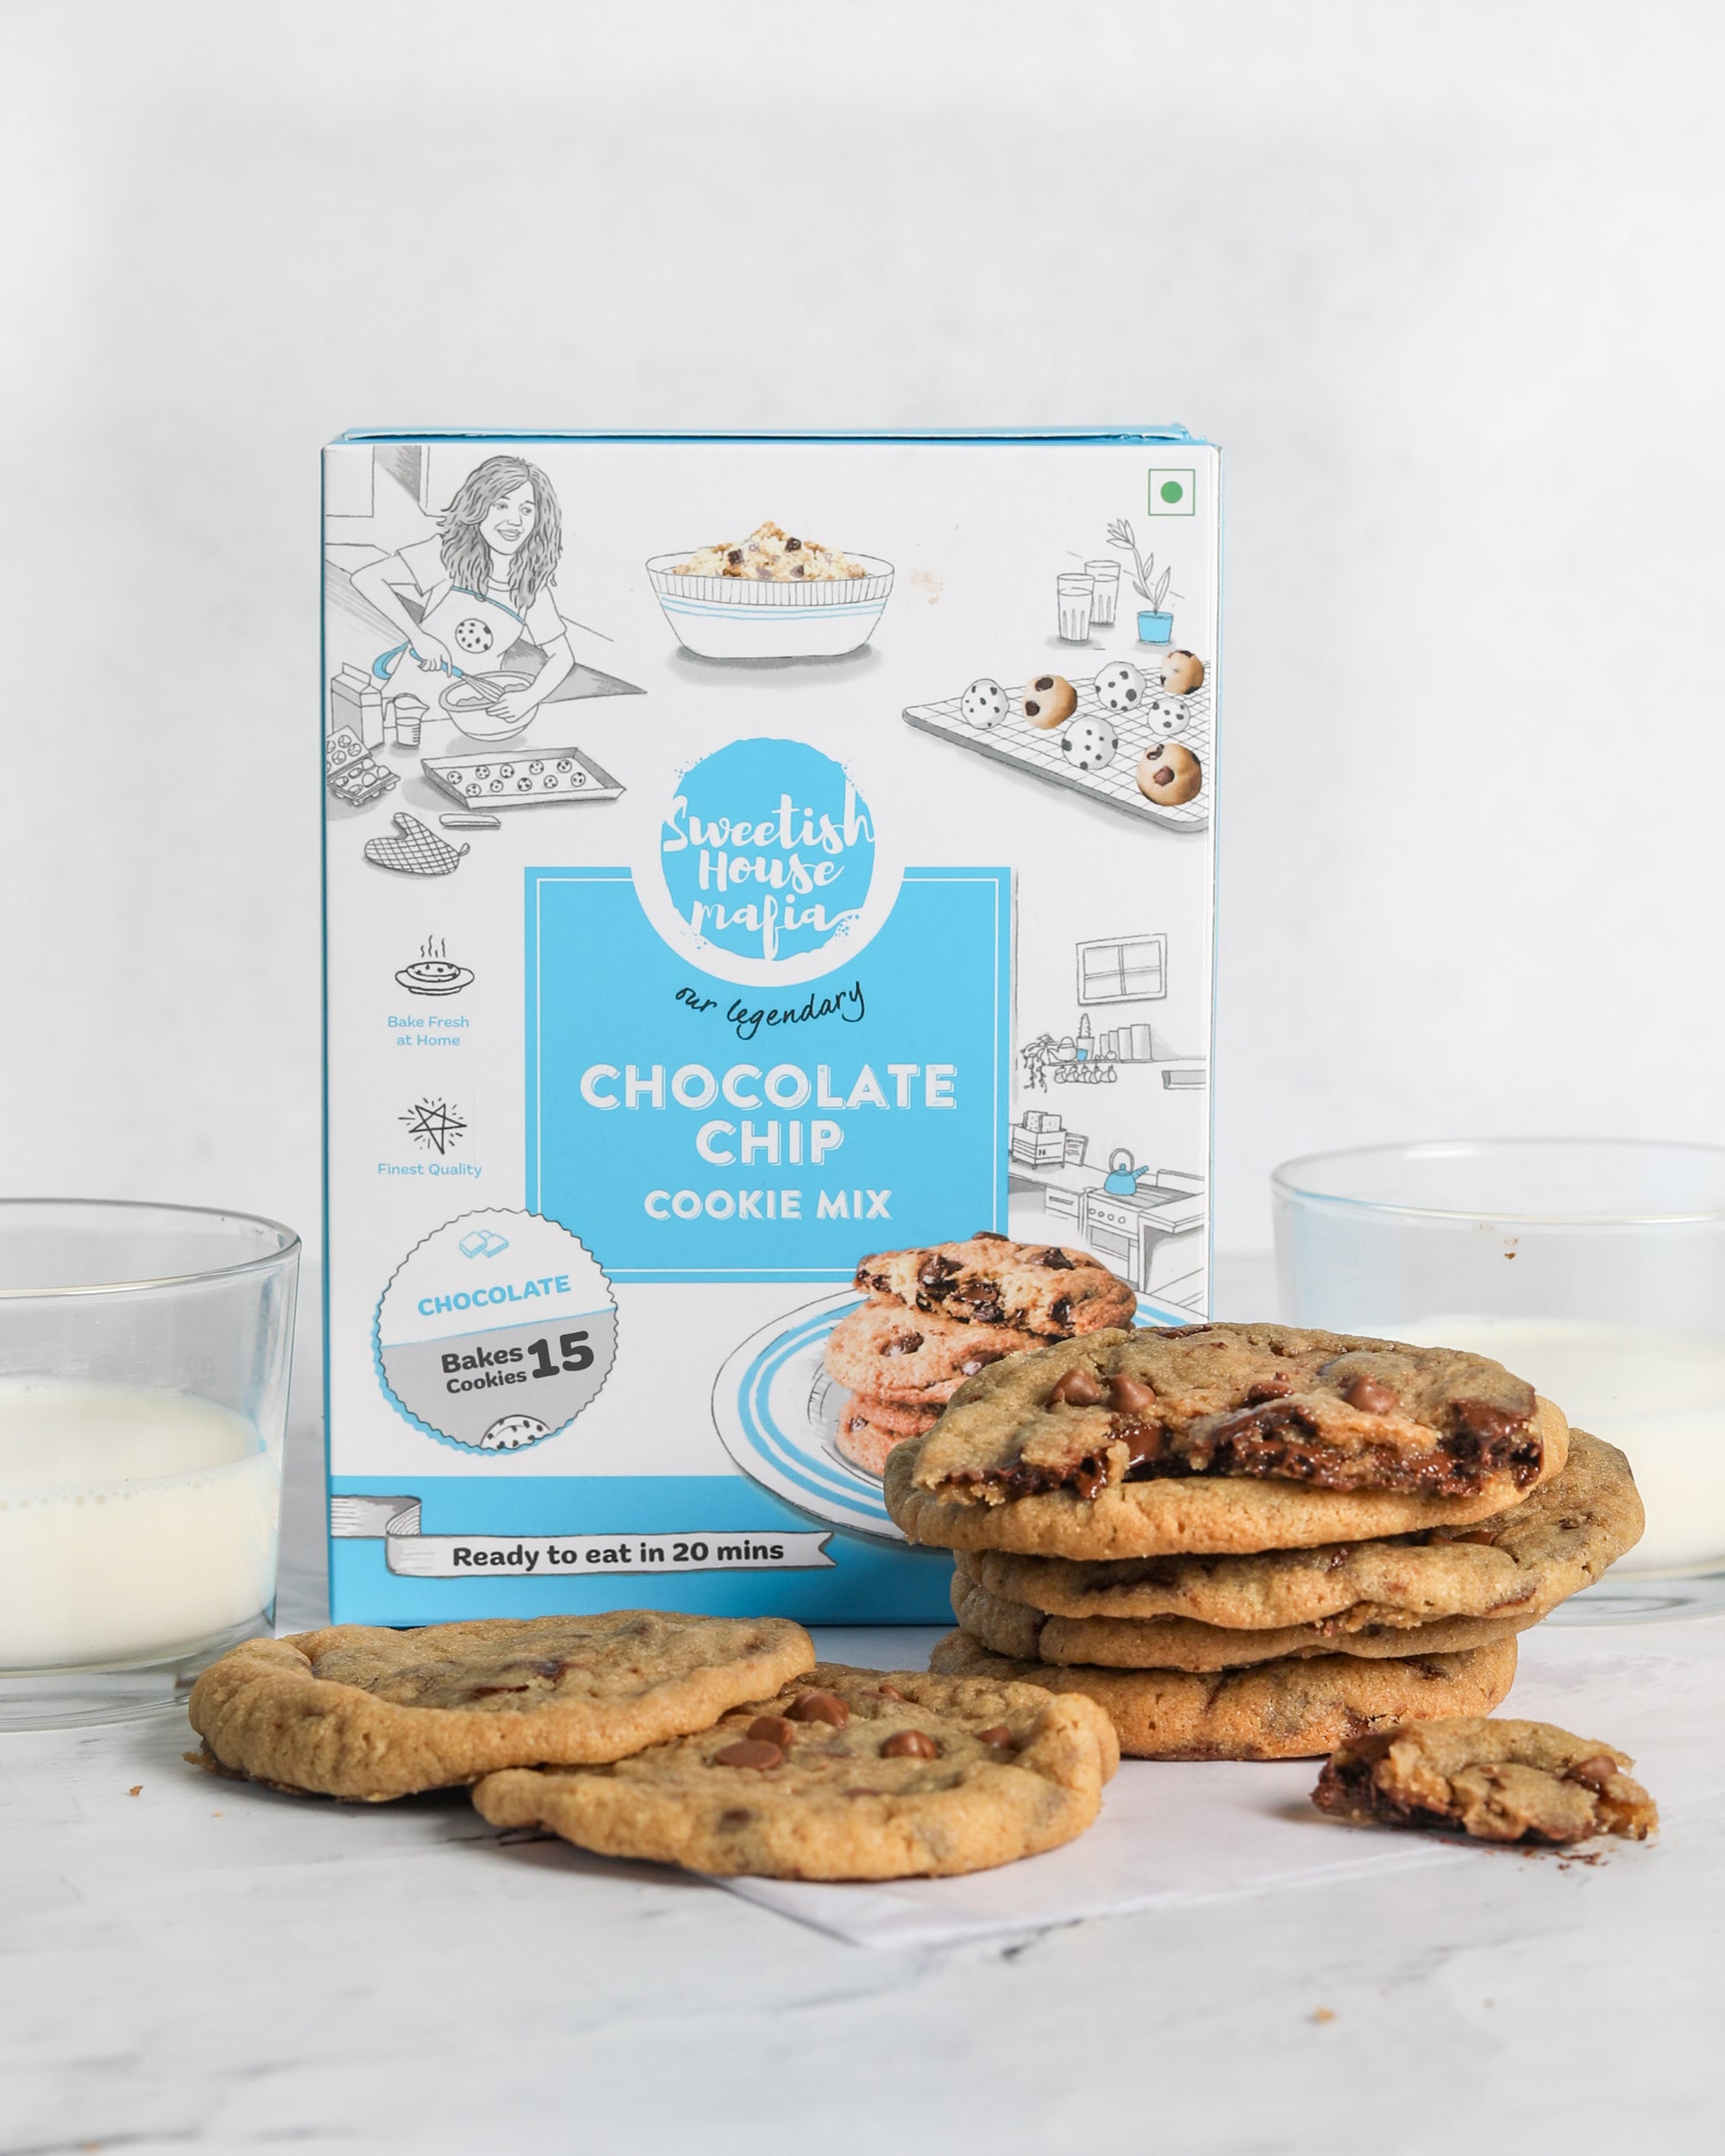 Best Chocolate Chip Cookie Premix in India (15 Cookies) - Sweetish House Mafia